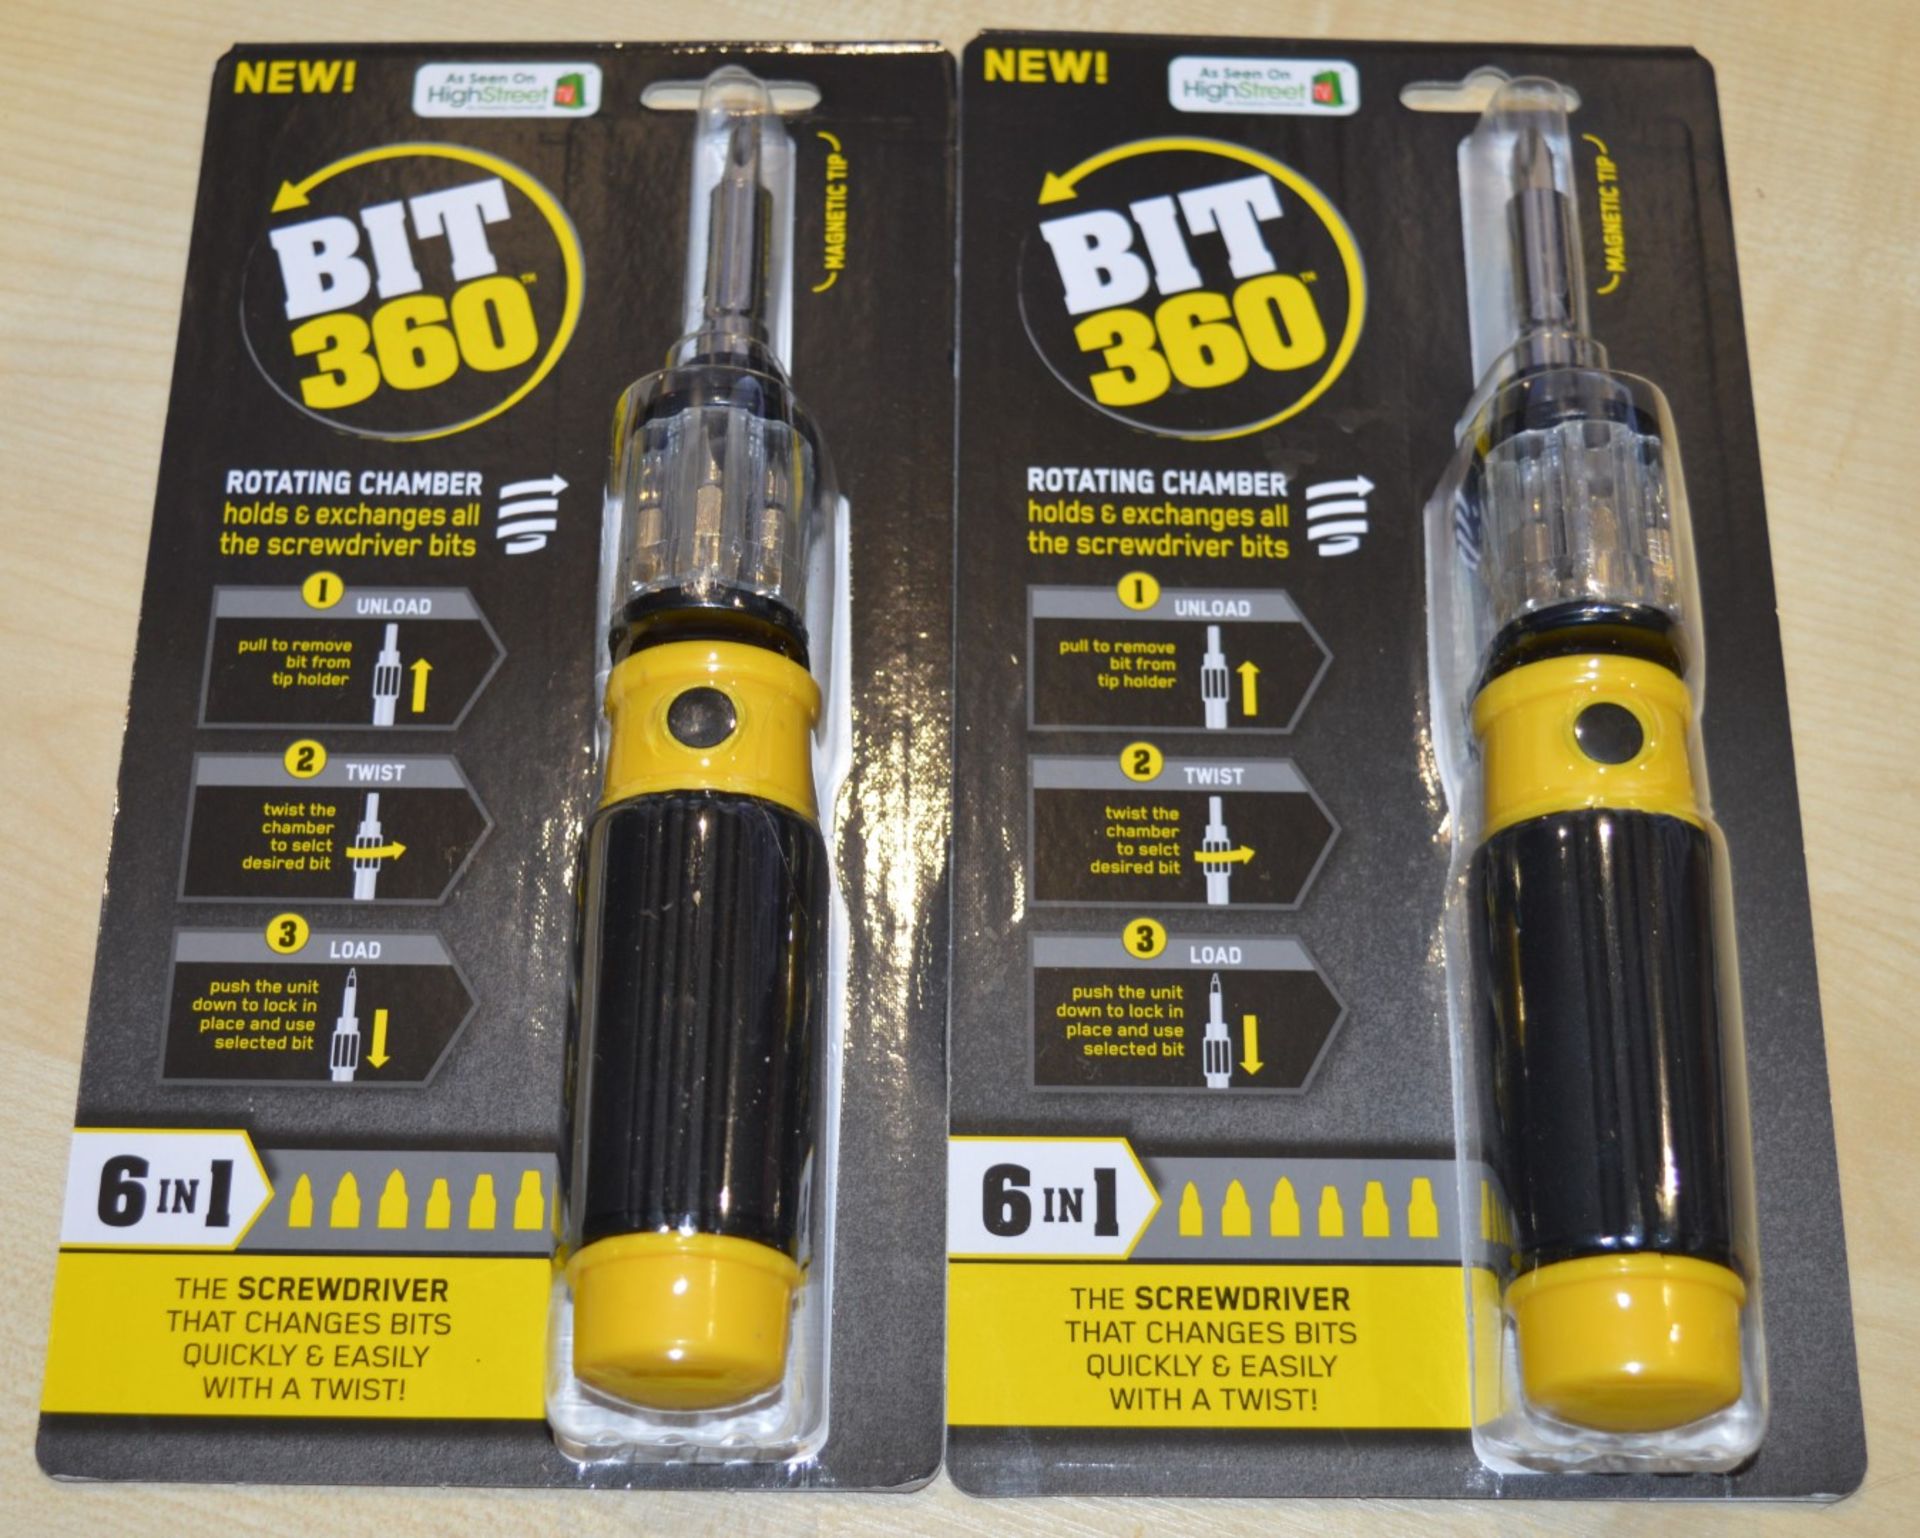 5 x Bit 360 All-in-One Screwdriver and Bit Set - The Screwdrive That Changes Bits Quickly and Easily - Image 7 of 7